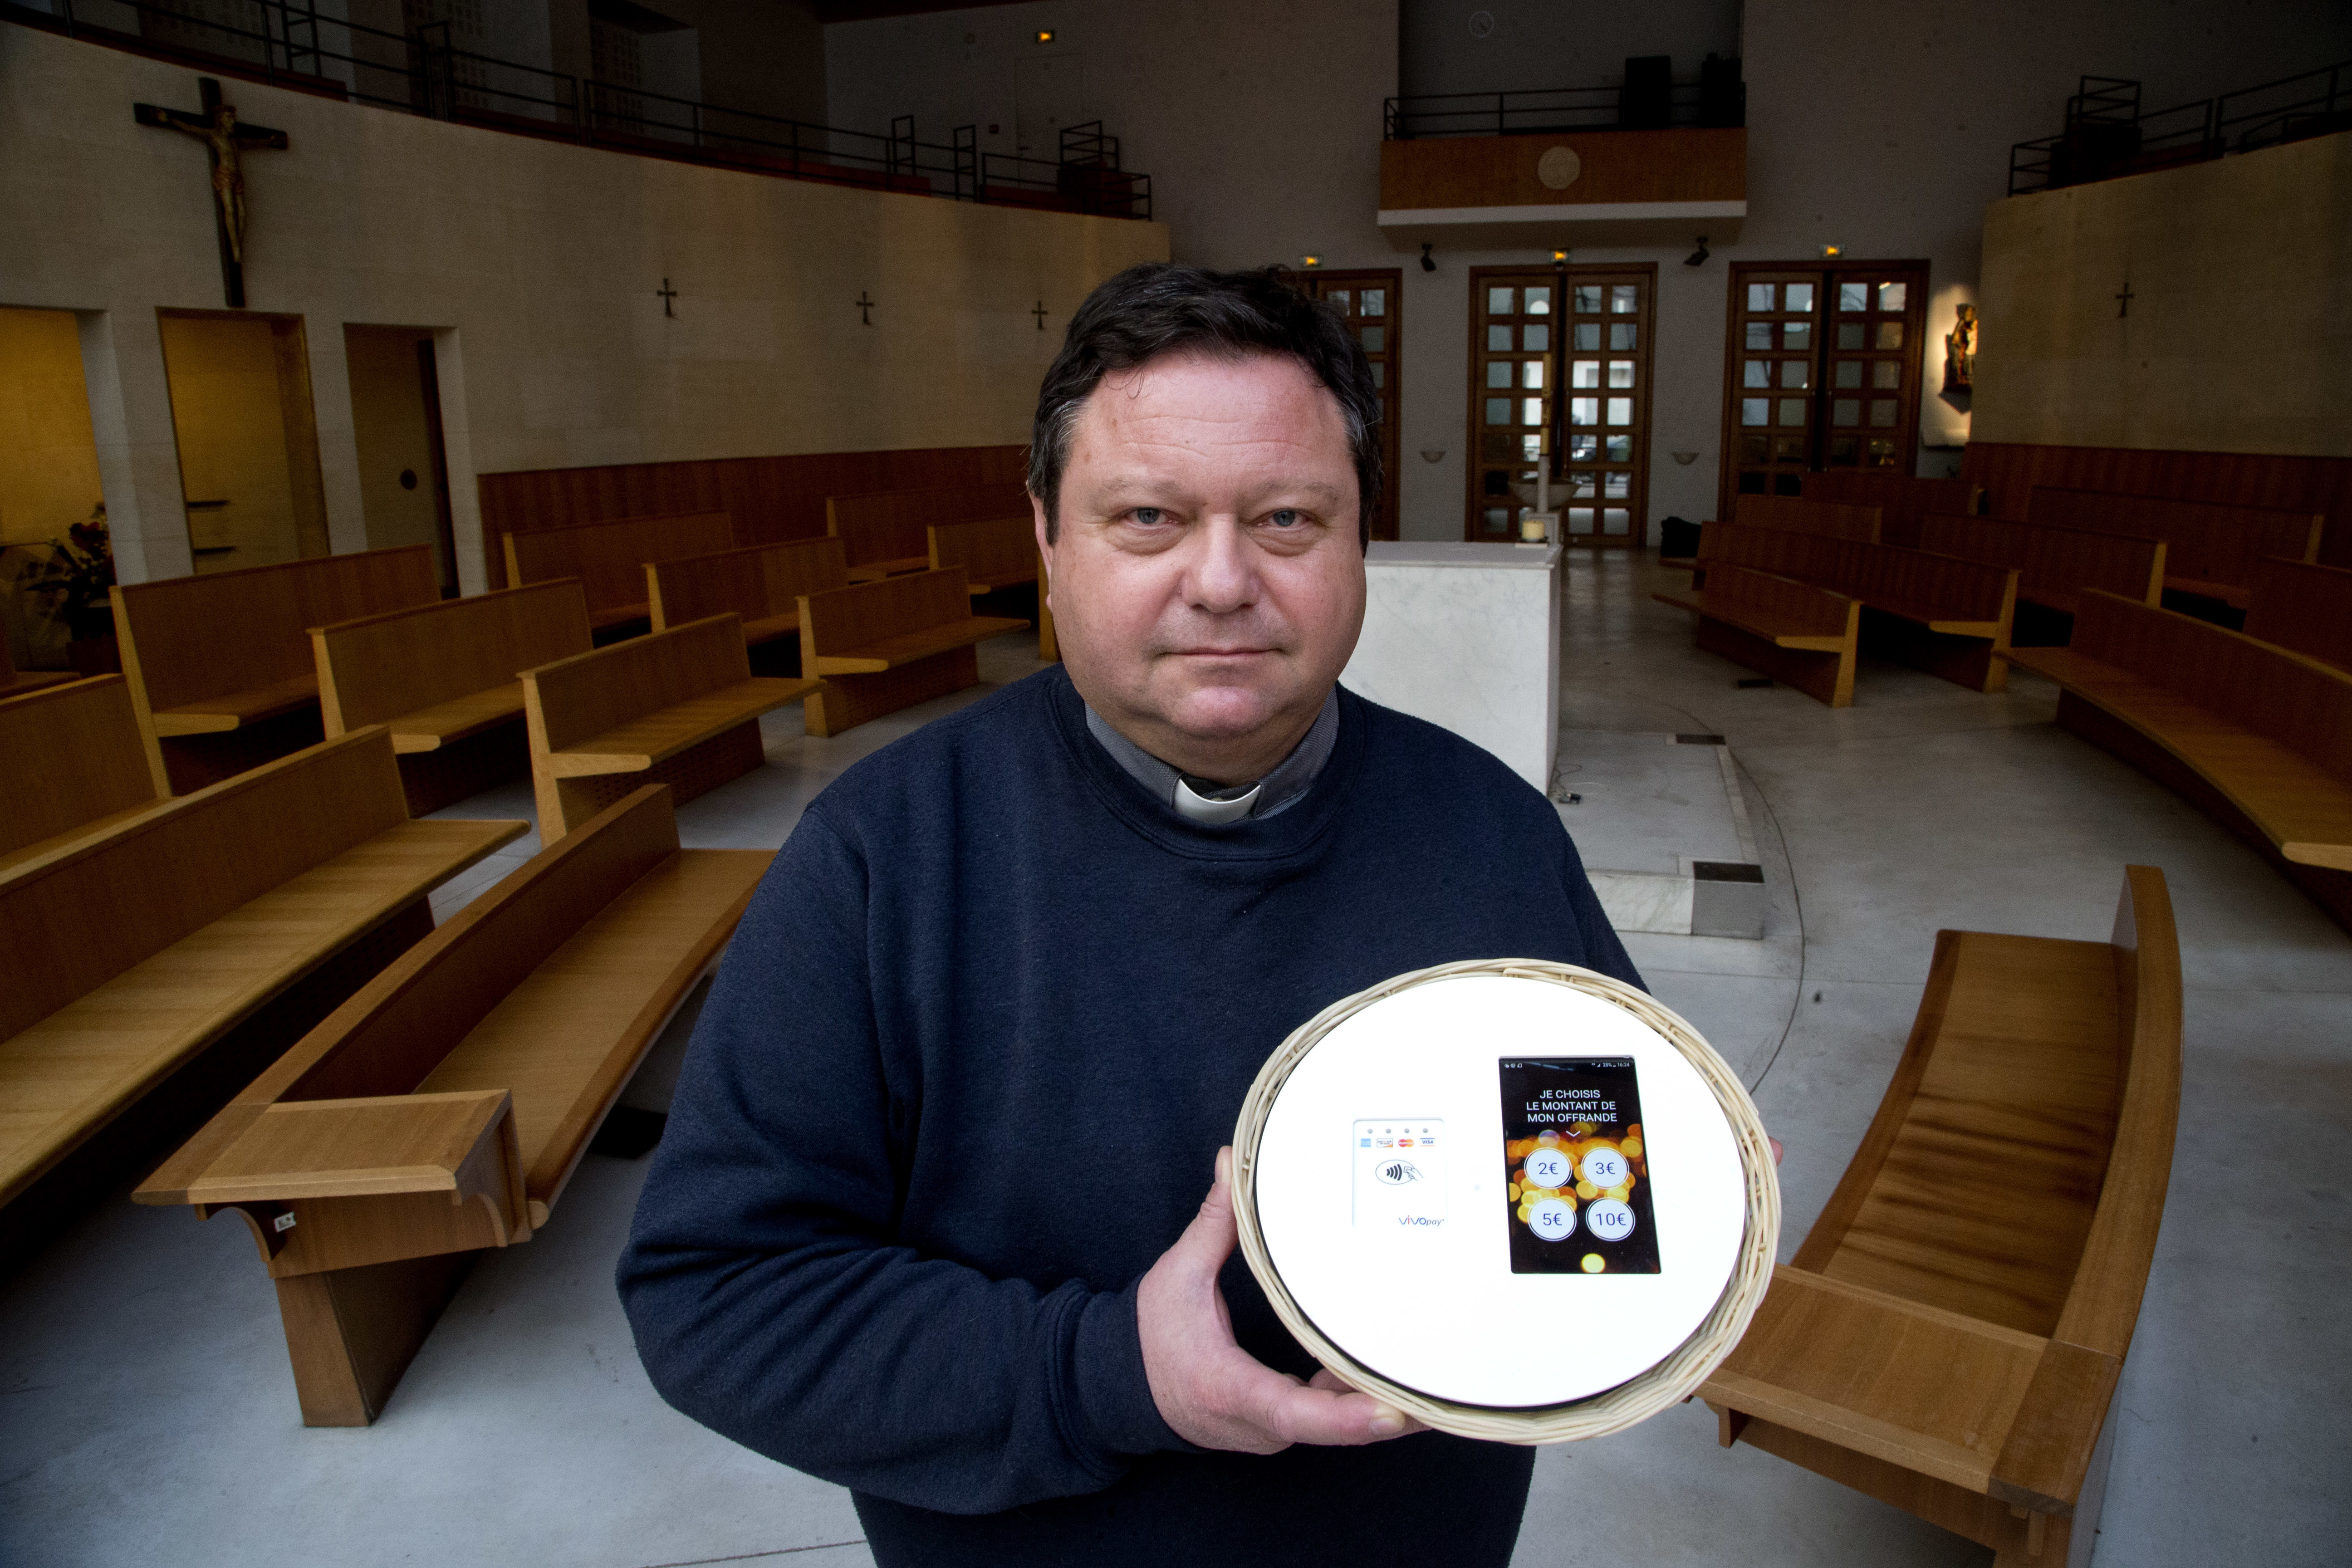 These Churches Are Using Digital Baskets to Collect Donations During Mass